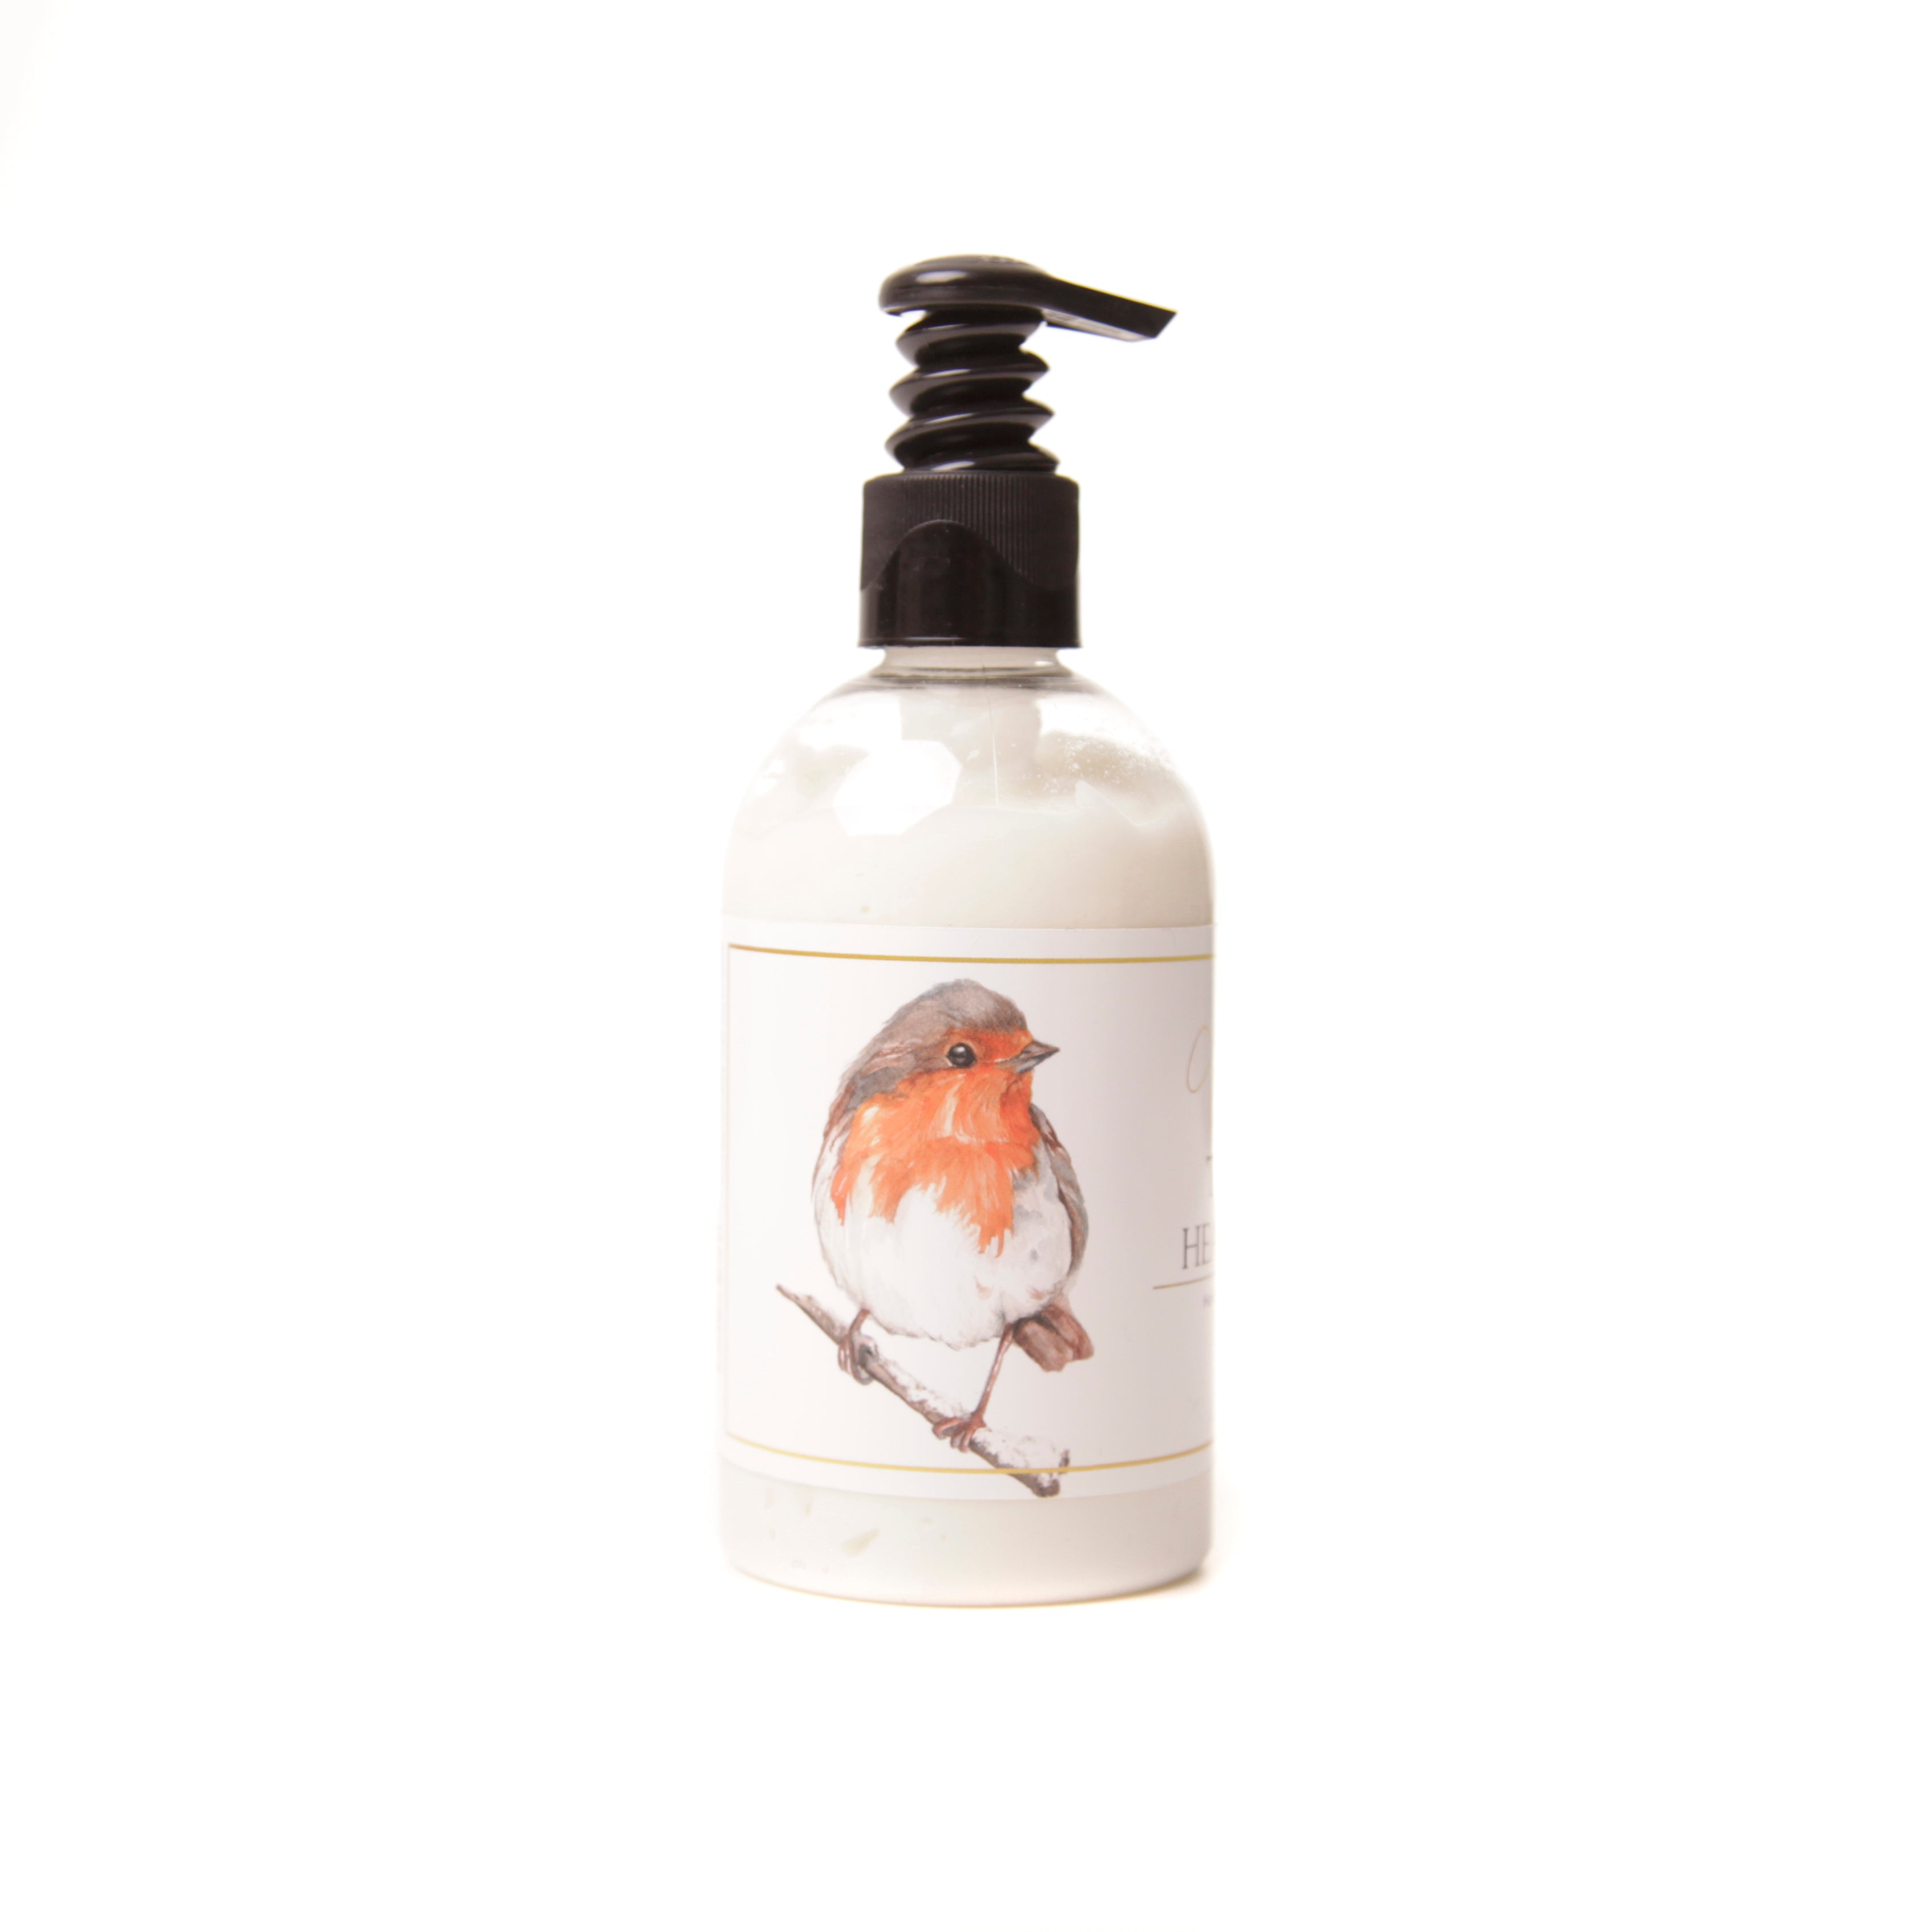 The Hearth' Hand Lotion with Robin Design